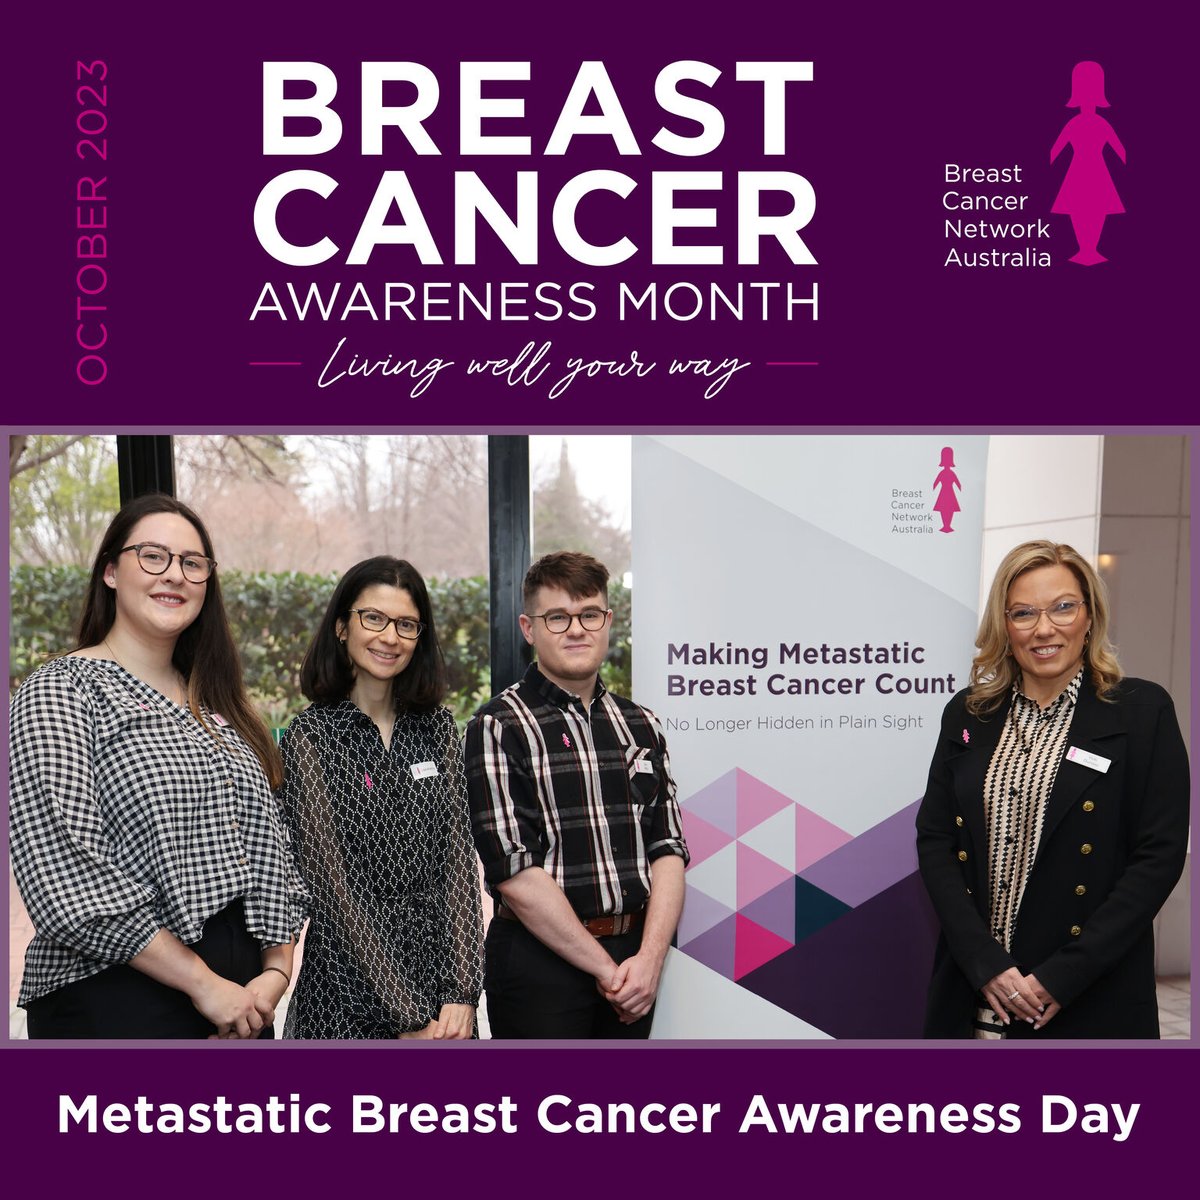 1 year ago today @BCNAPinkLady and I launched BCNA's inaugural Issues Paper 'Making Metastatic Breast Cancer Count' to draw attention to the gaps in #MBC prevalence data. Today they released 'Time to Count People with MBC - A Way Forward' lnkd.in/gakvd89z